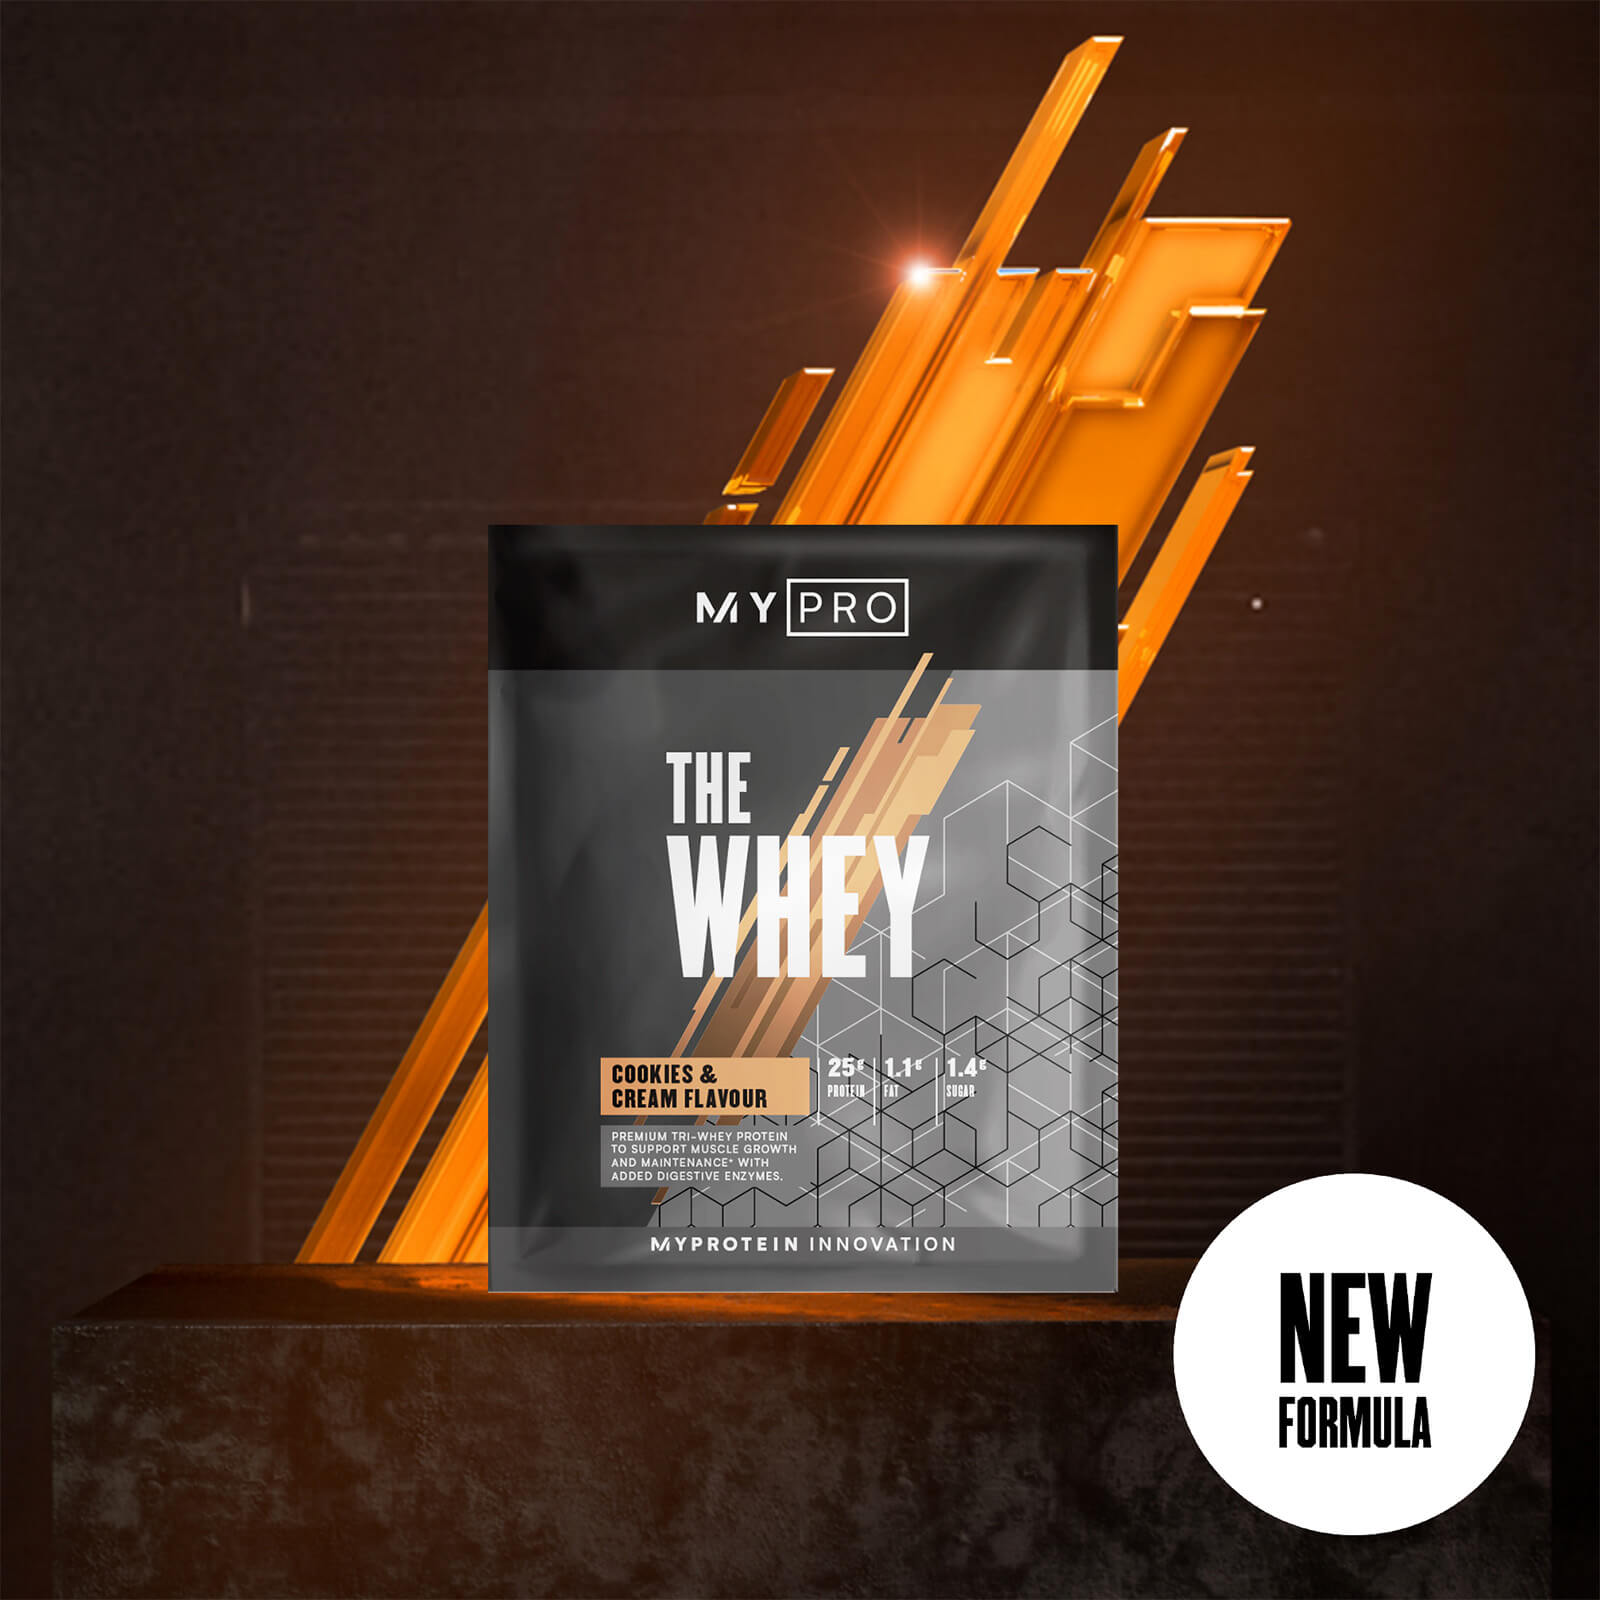 Myprotein THE Whey (Sample) - 30g - Cookies and Cream